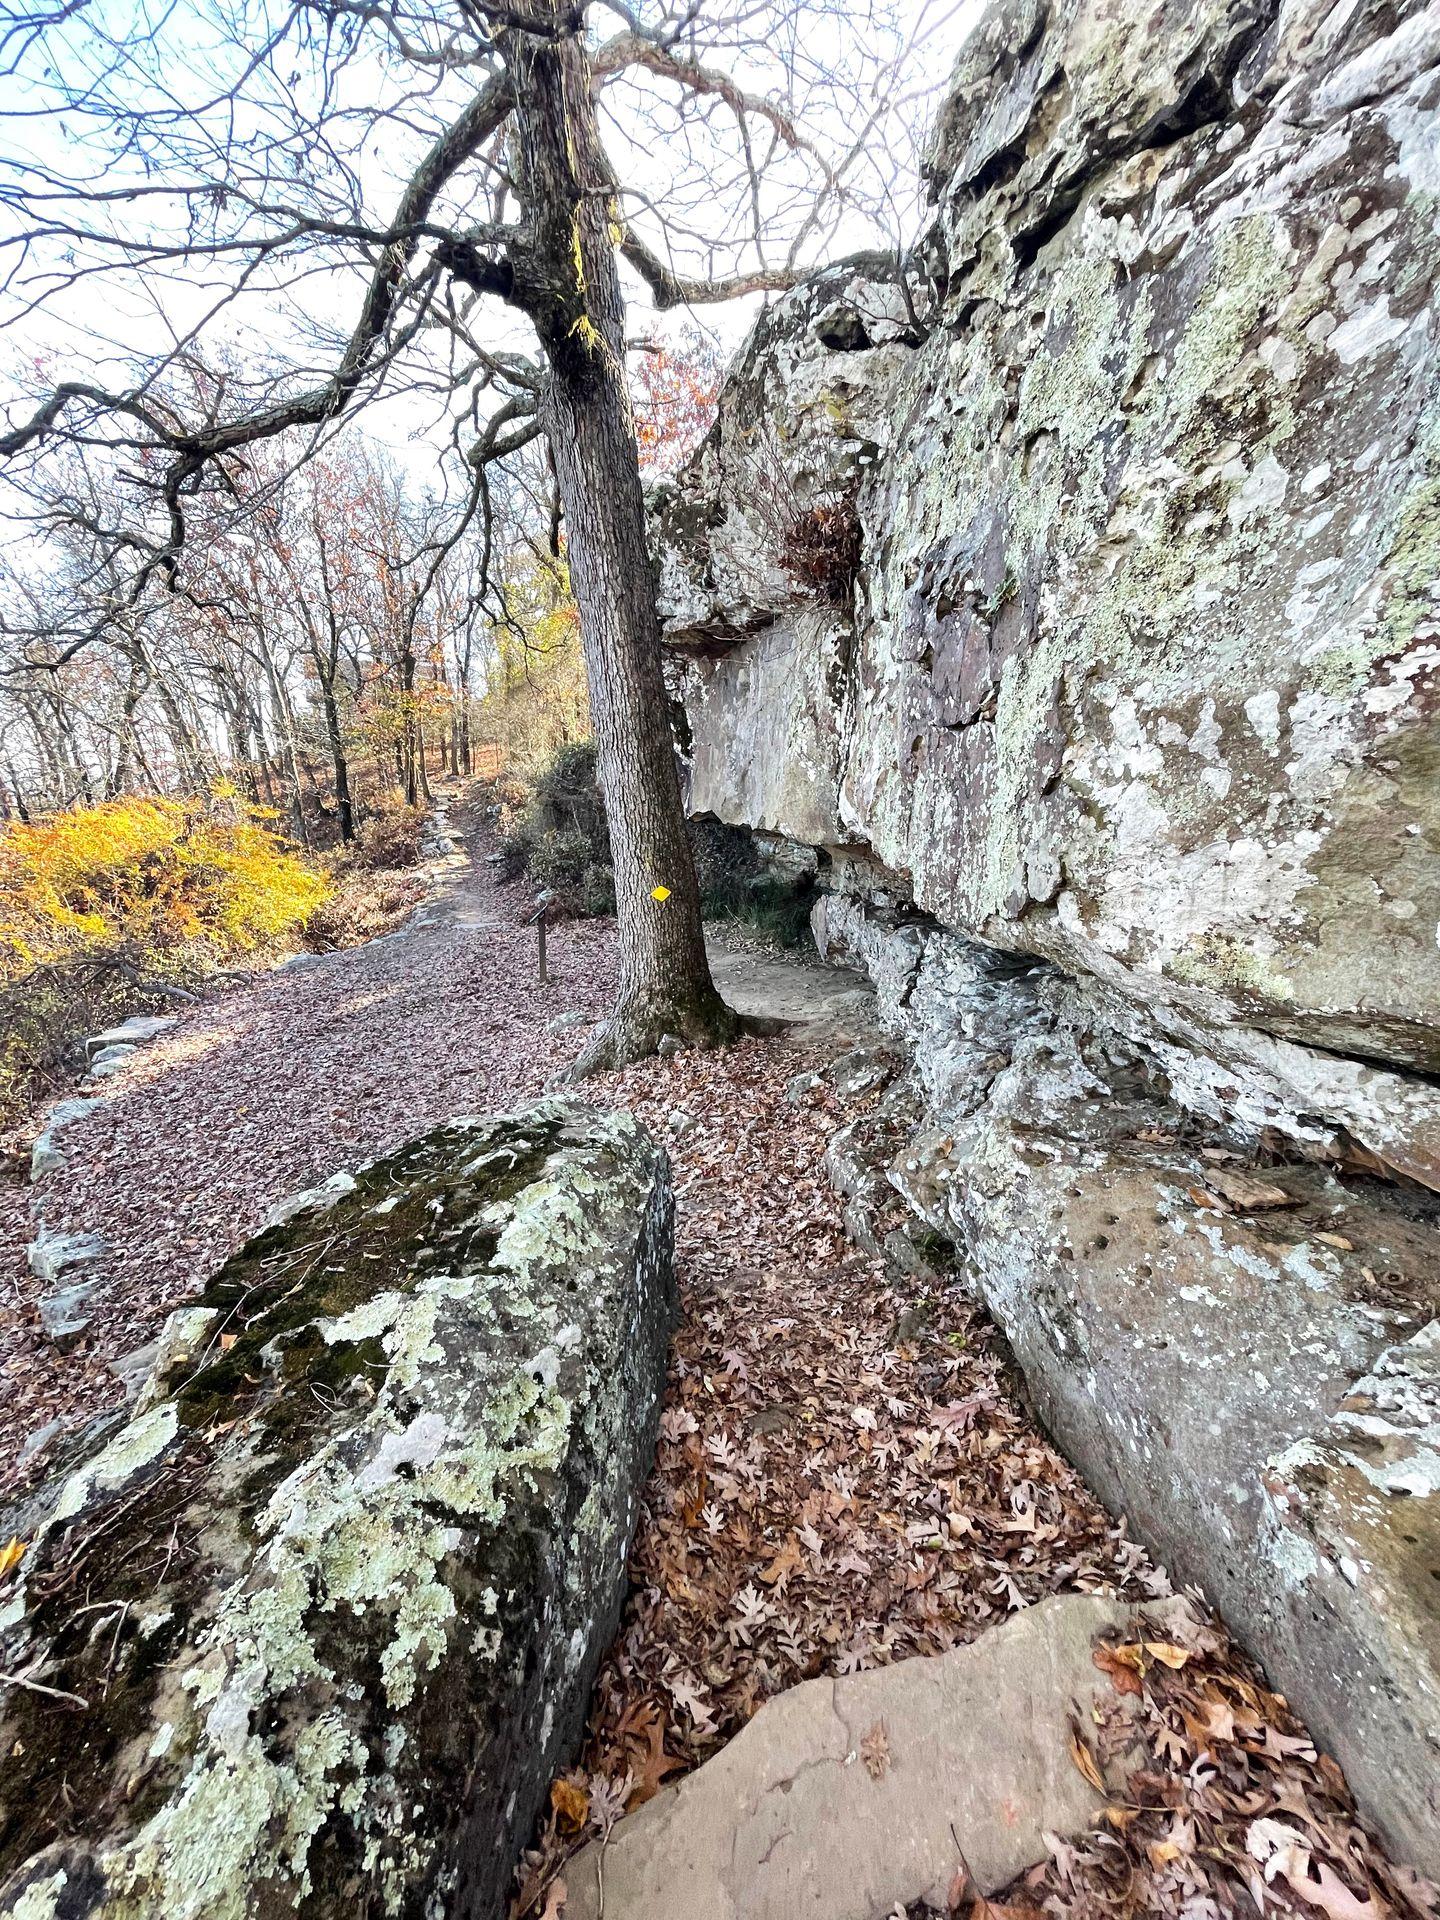 A large gray rock face and a trail covered with fallen red leaves.